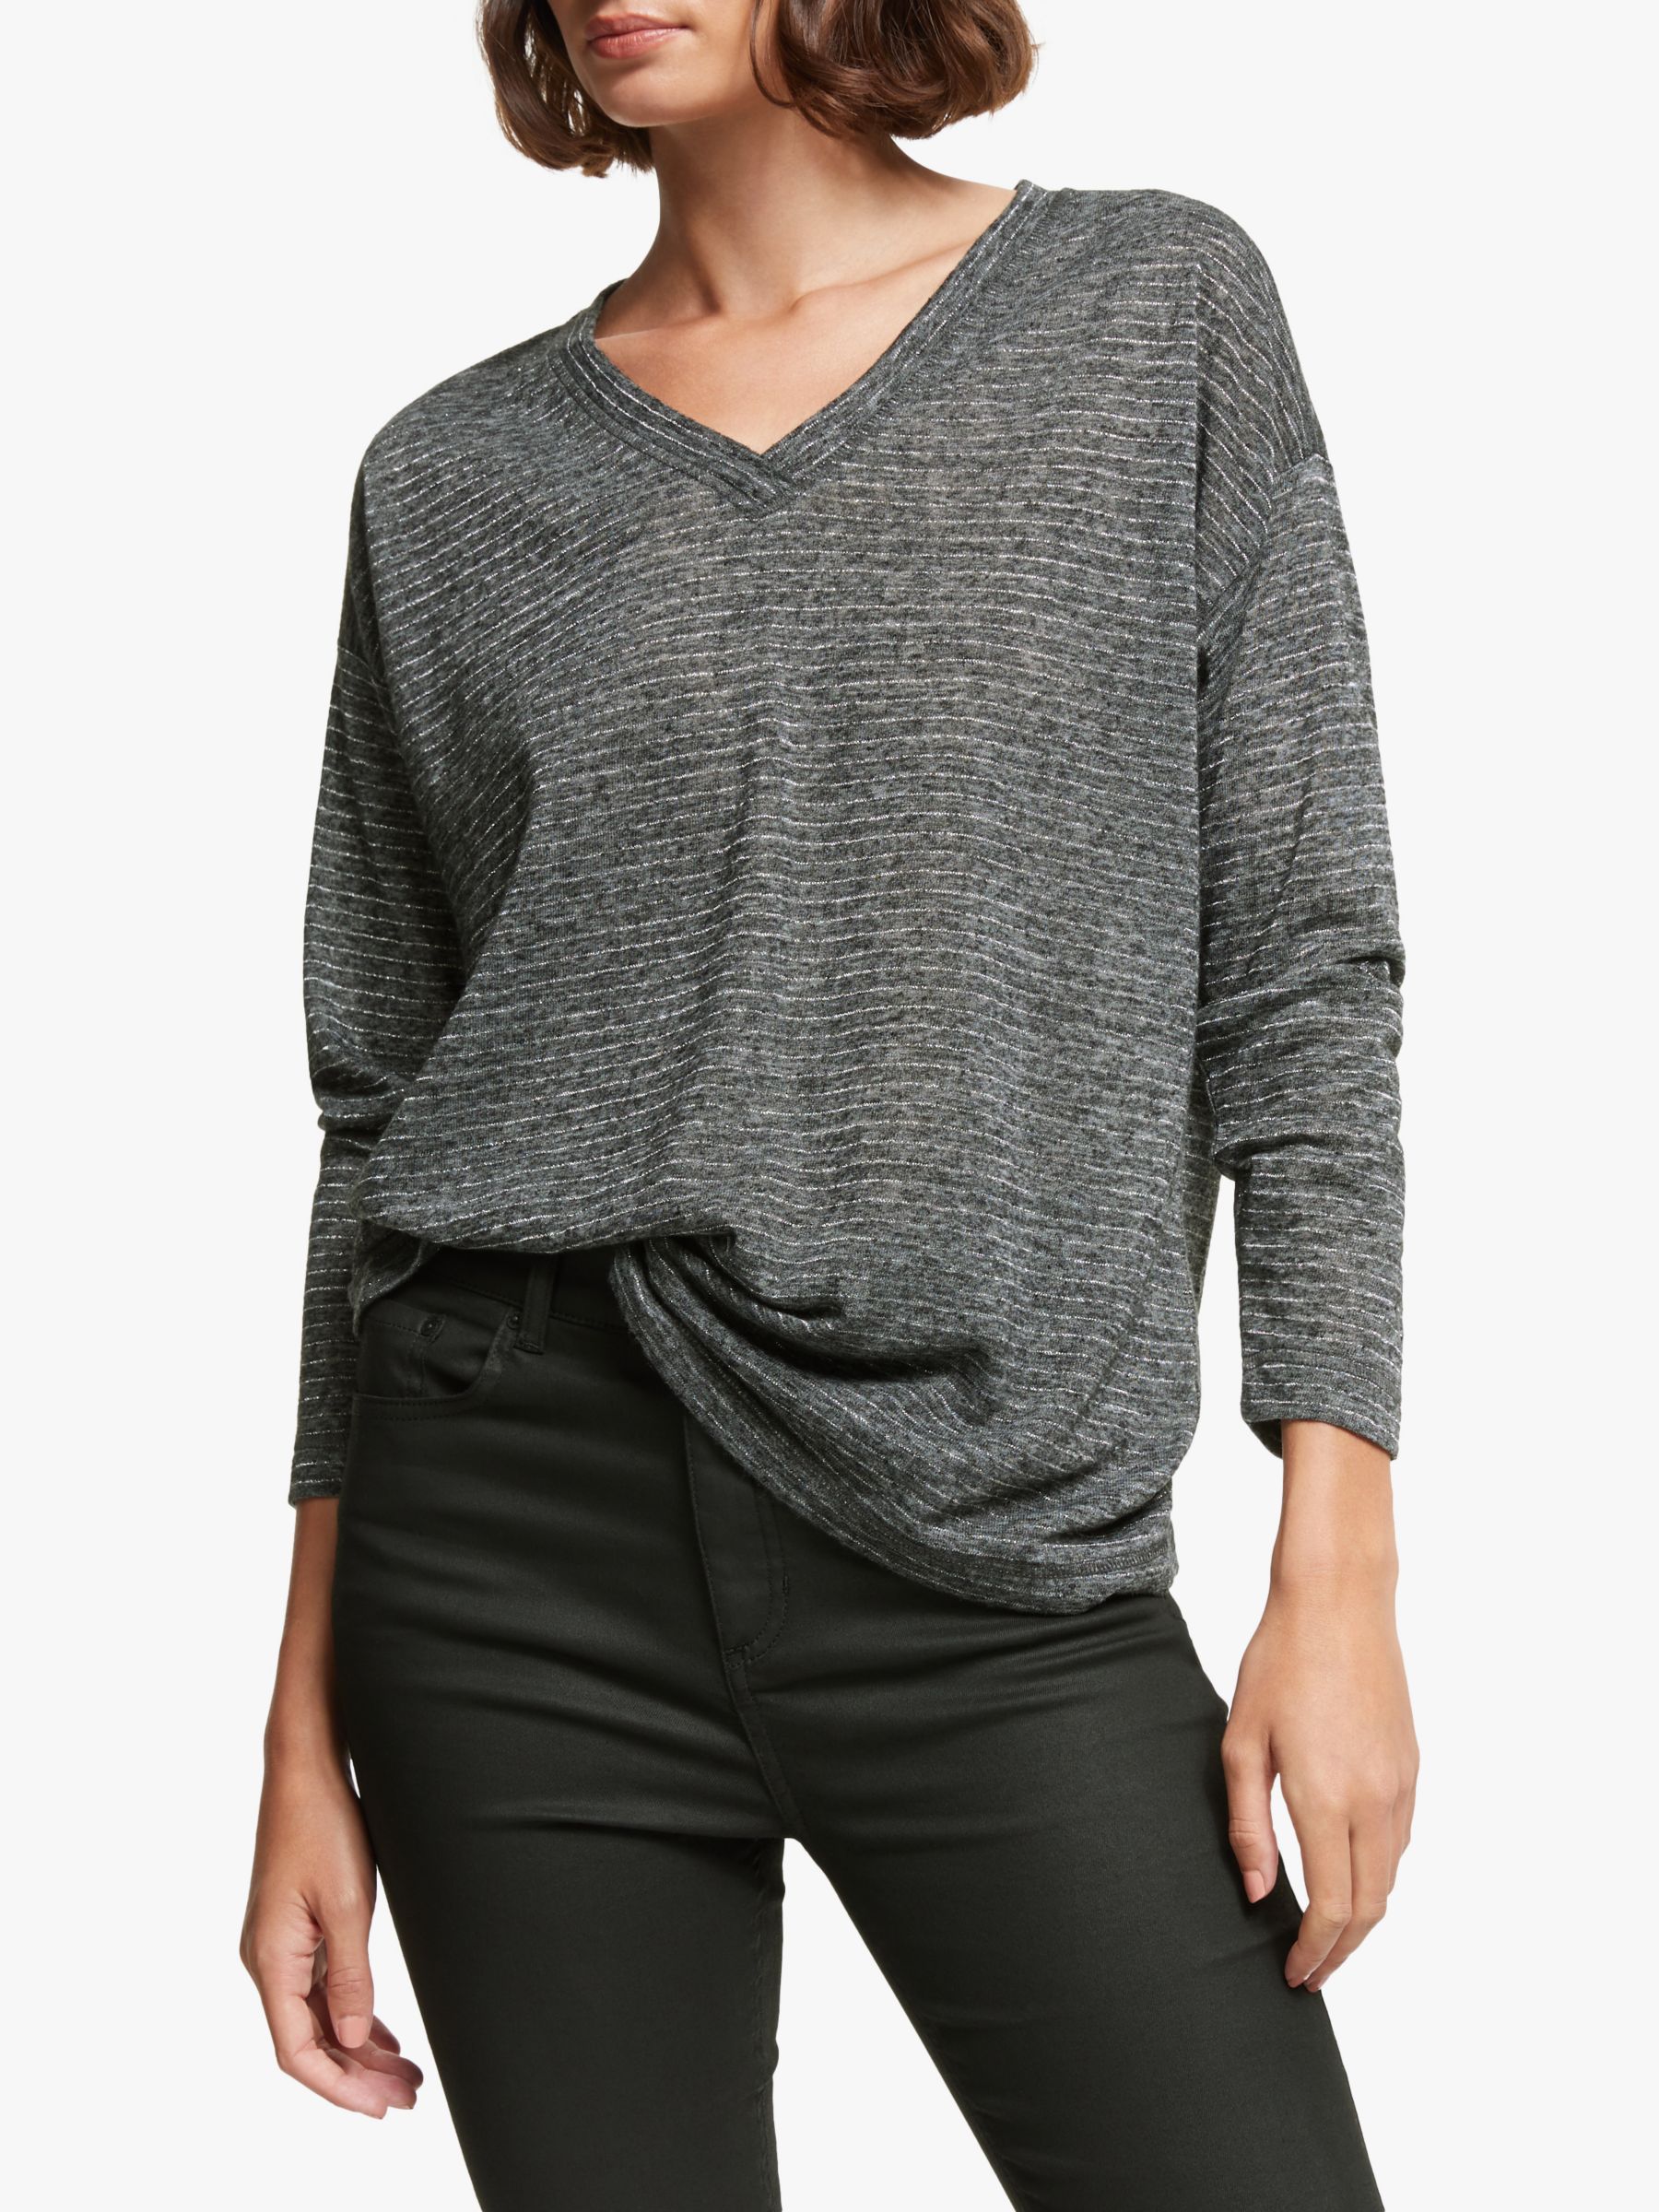 AND/OR Daria Dolman Stripe Top, Charcoal/Silver